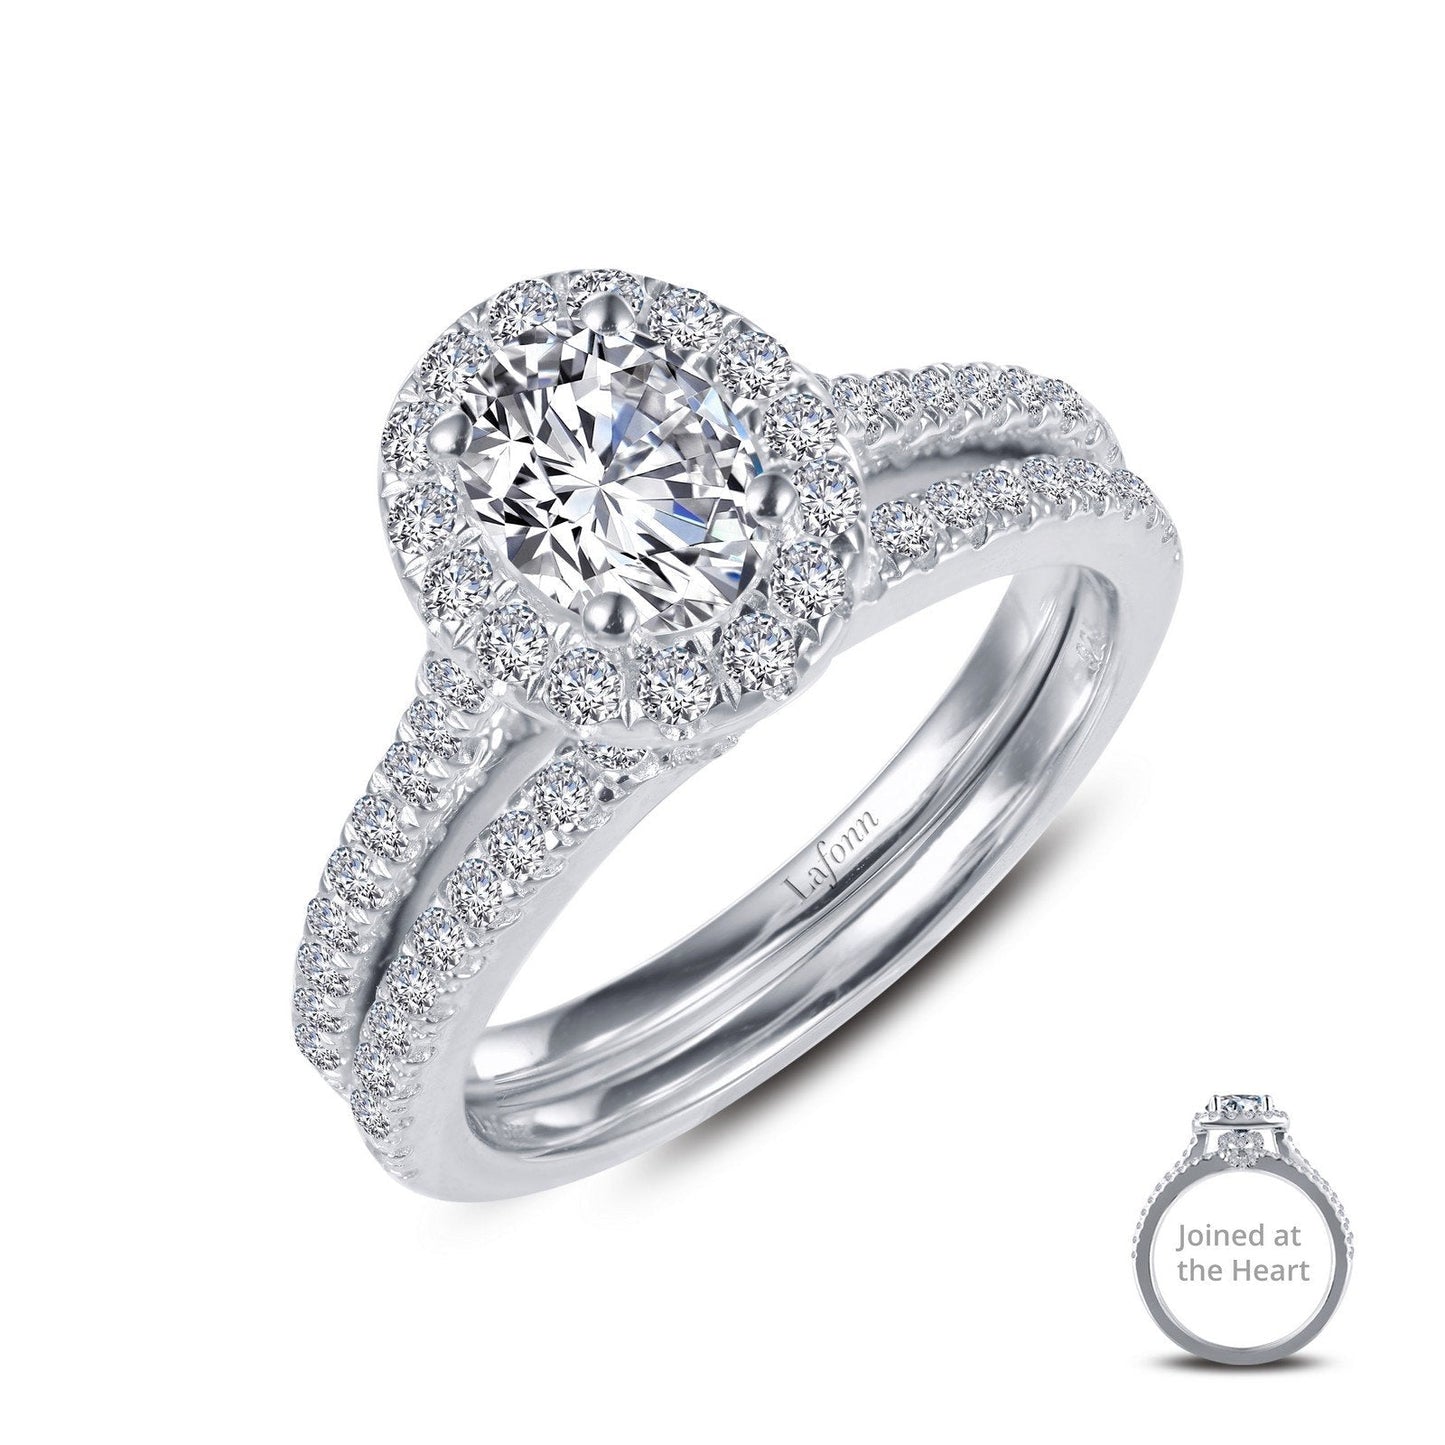 Load image into Gallery viewer, LaFonn Platinum Simulated Diamond Size: 7X5mm Oval, Approx. 0.76 CTW RINGS Joined-At-The-Heart Wedding Set
